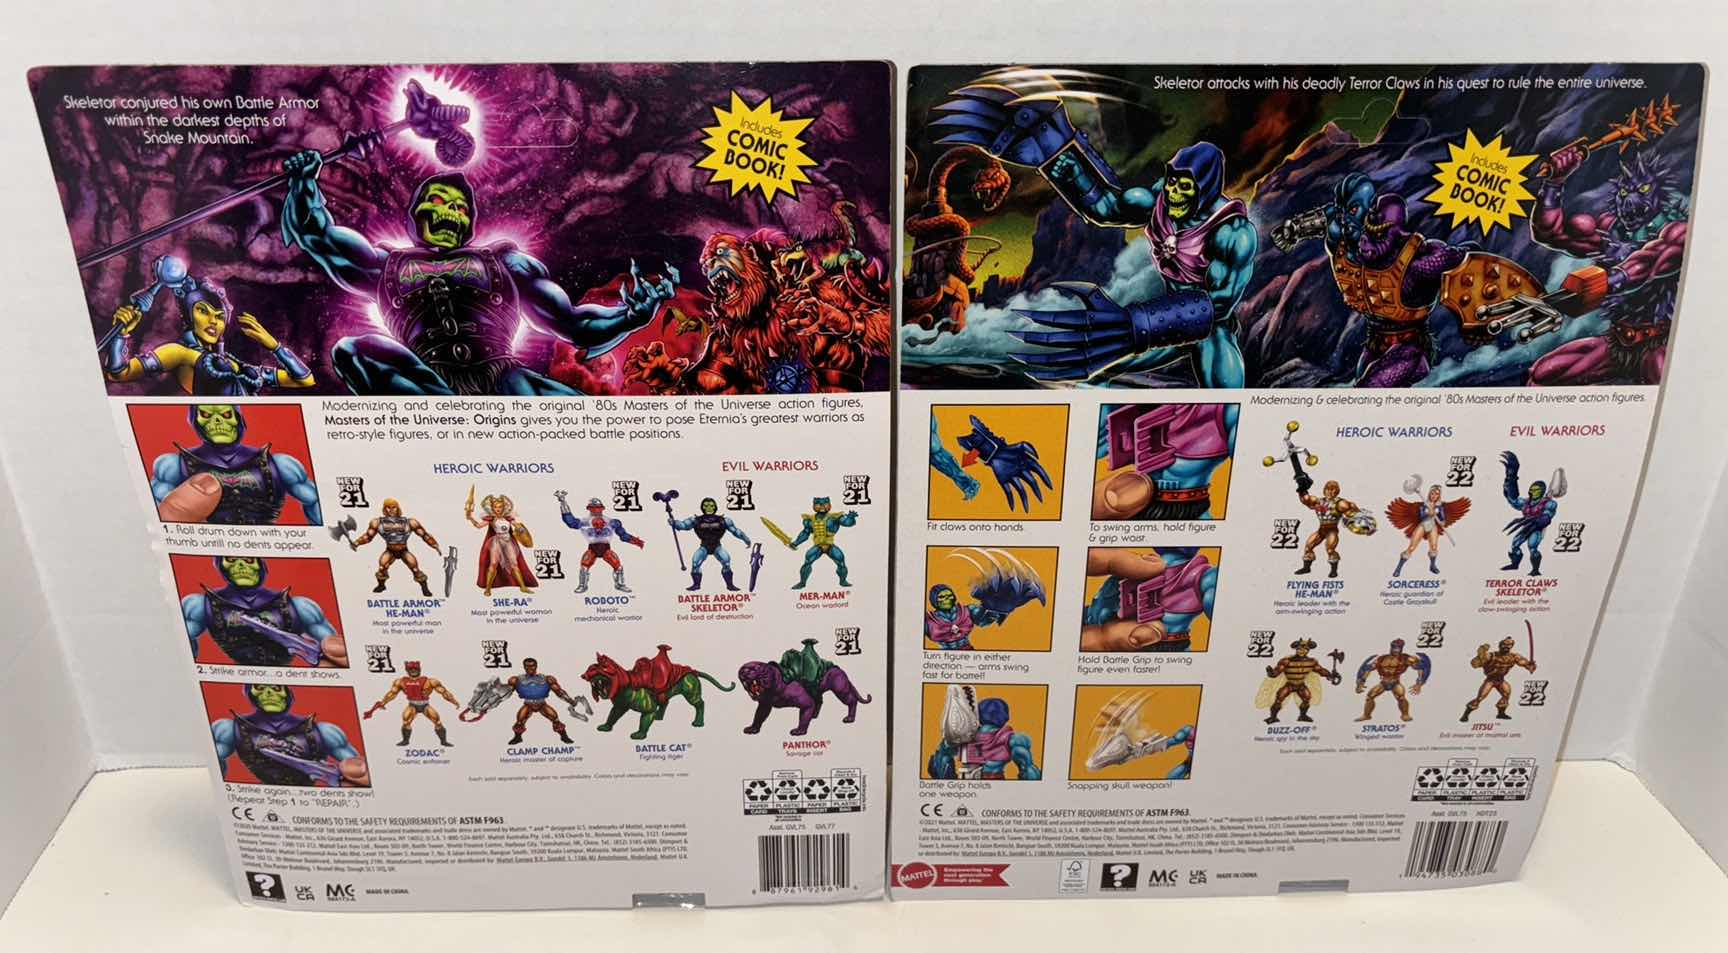 Photo 4 of NEW MATTEL MASTERS OF THE UNIVERSE 2-PACK “BATTLE ARMOR SKELETOR” & “TERROR CLAWS SKELETOR” ACTION FIGURES & ACCESSORIES